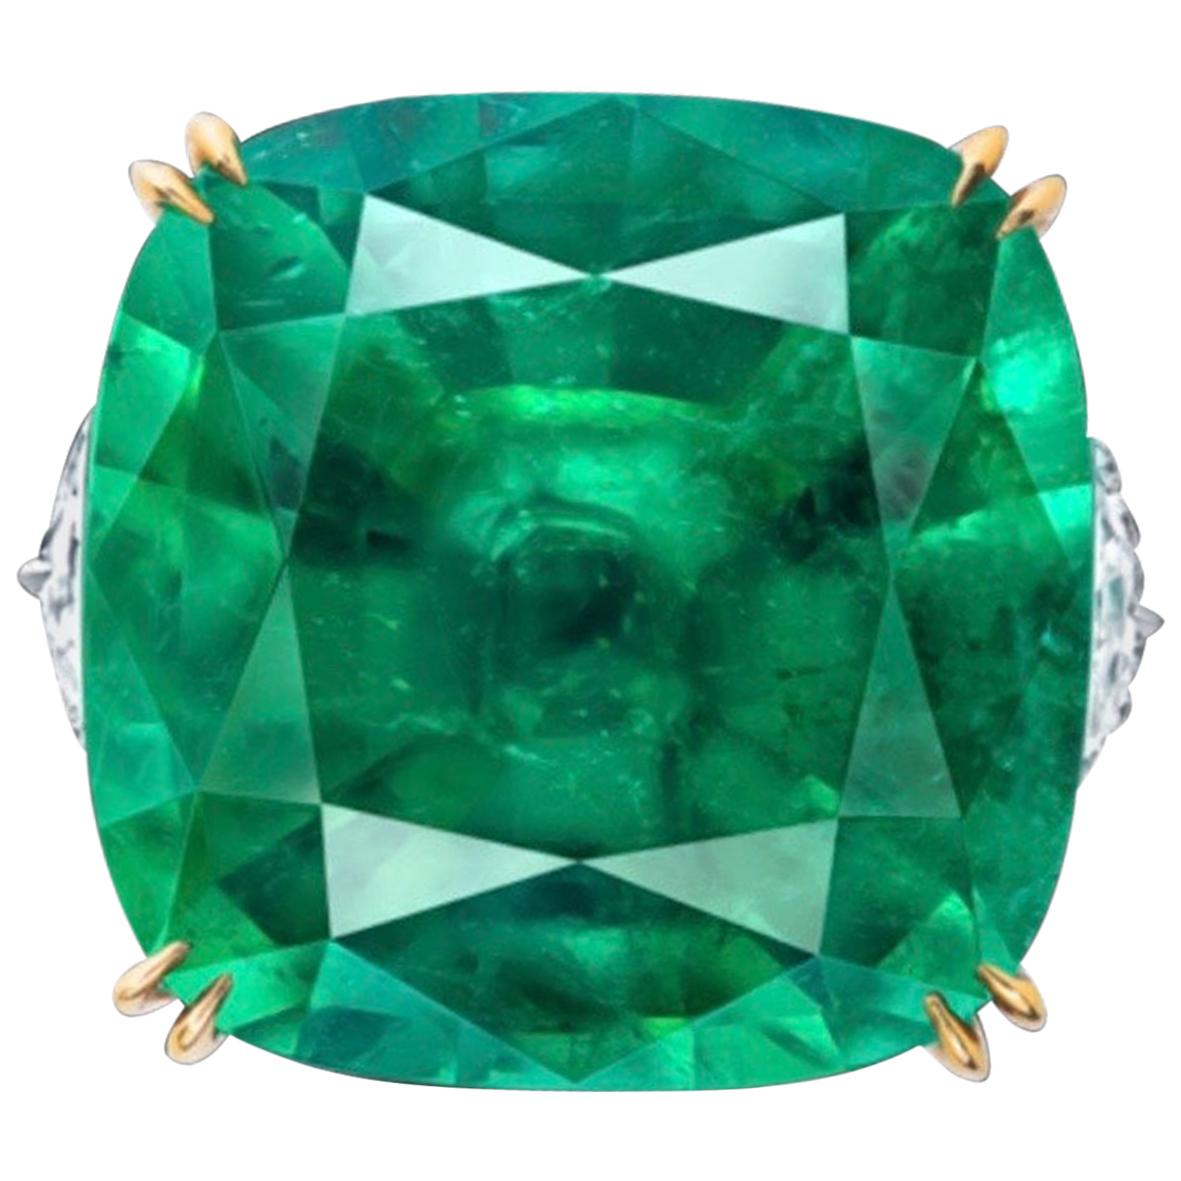 Do emeralds need to be oiled?